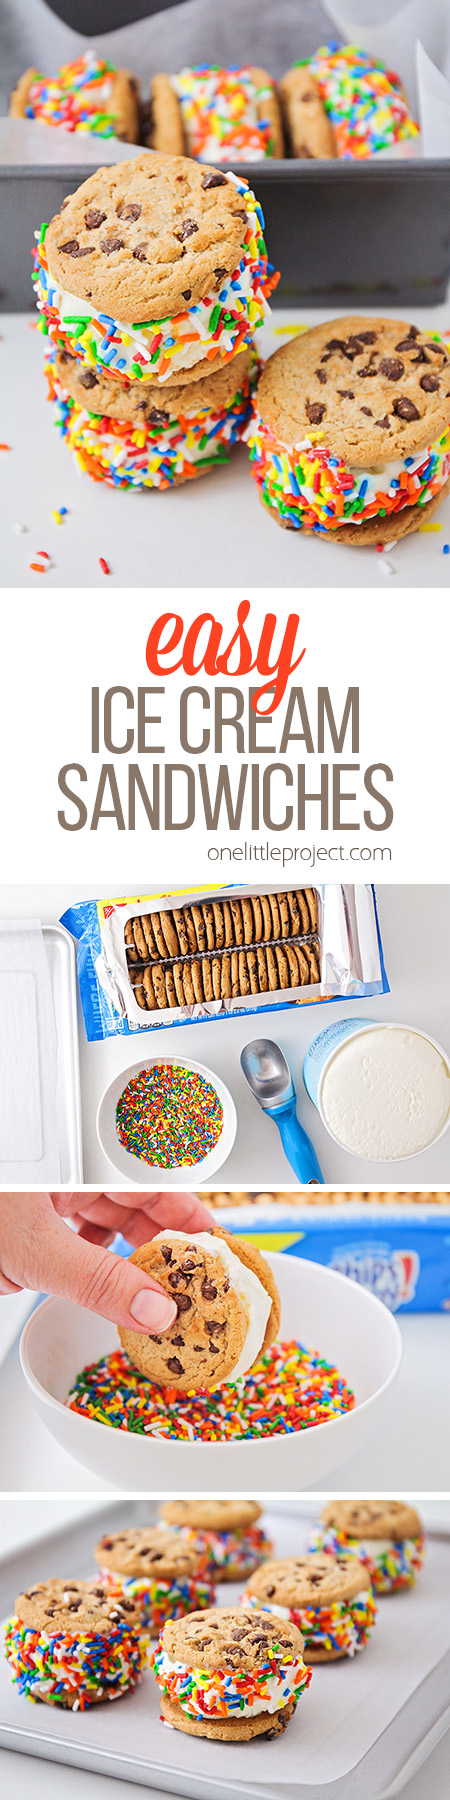 These fun and festive ice cream sandwiches are so easy to make, and have only three ingredients! They're the perfect sweet treat to enjoy this summer!